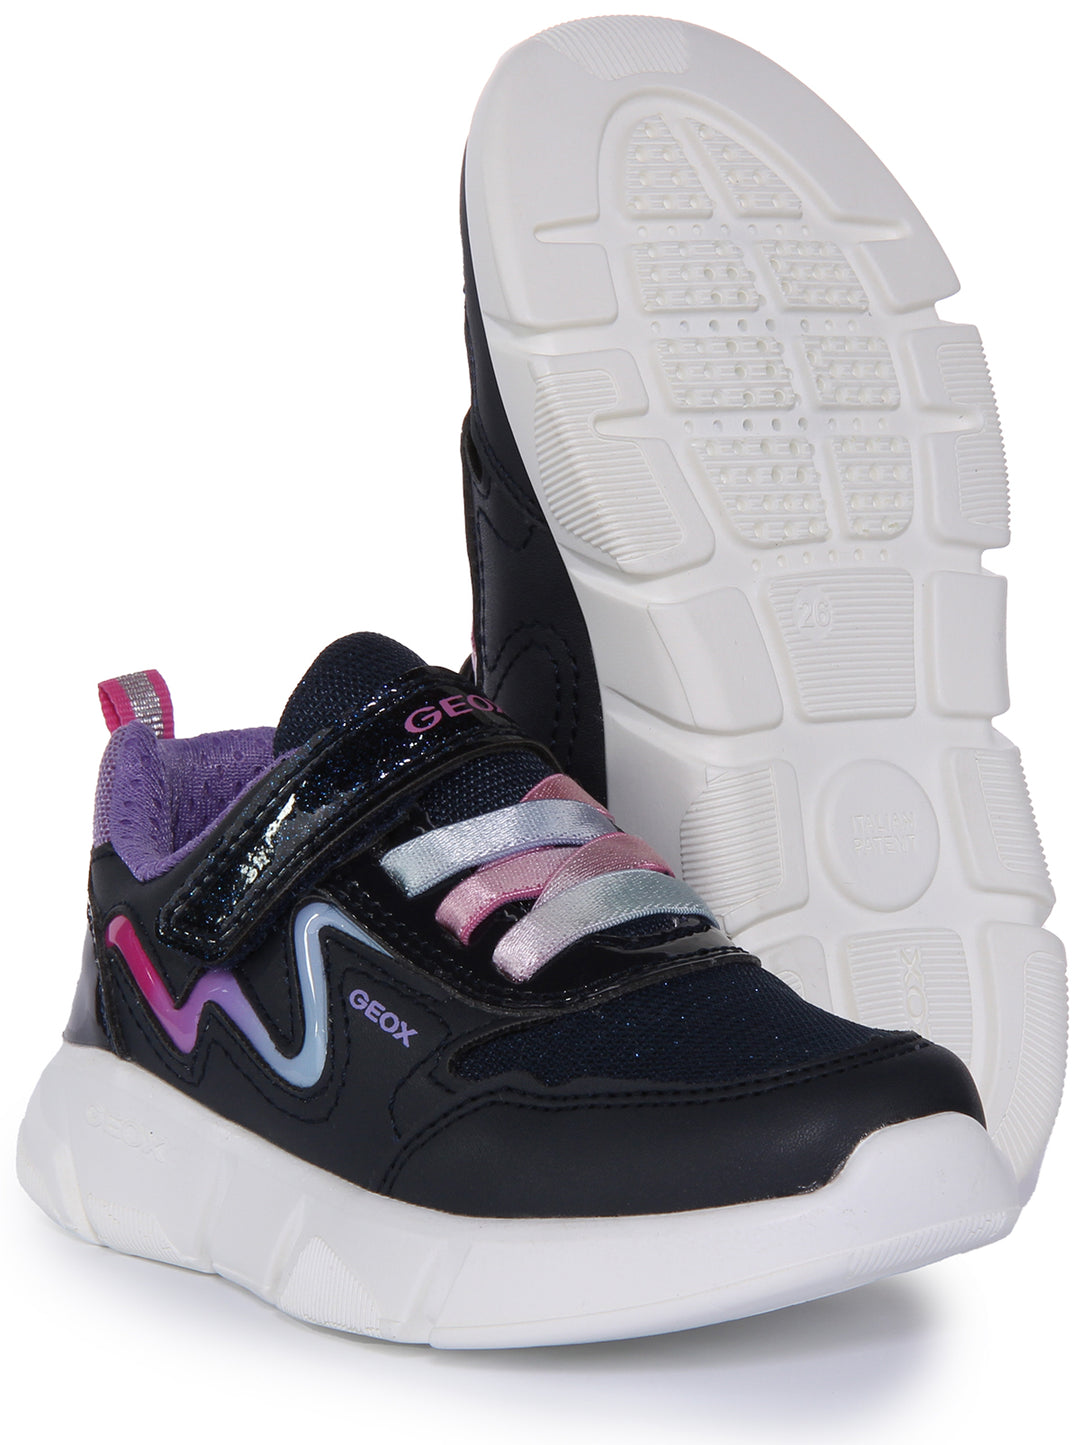 Geox J Aril In Navy For Kids